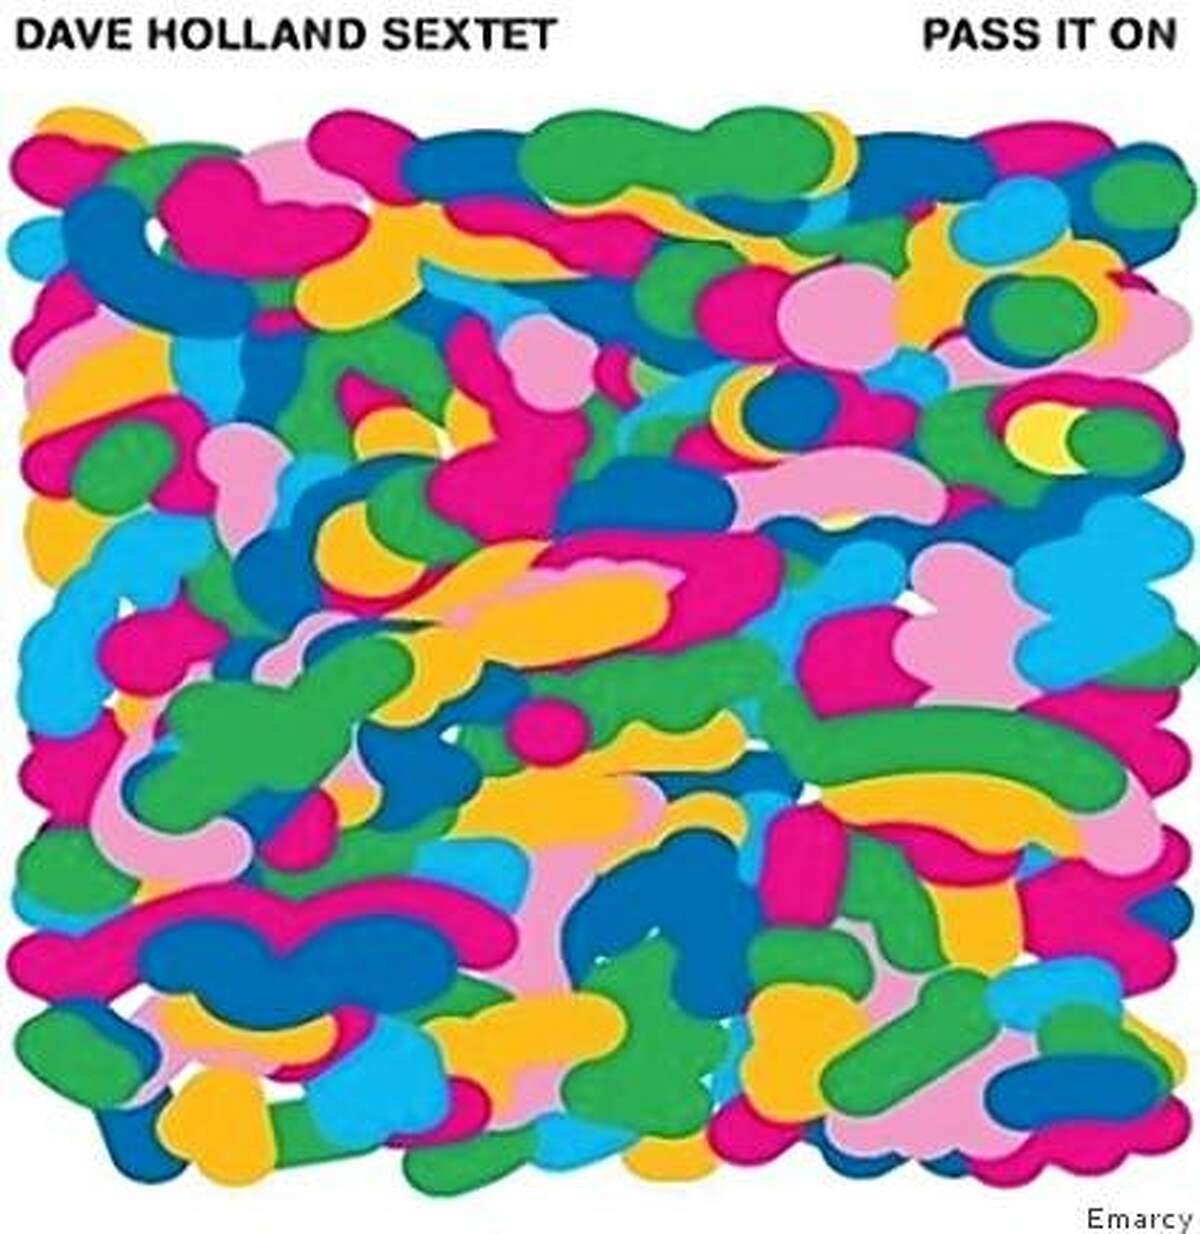 CD cover: Dave Holland Sextet's "Pass It On"